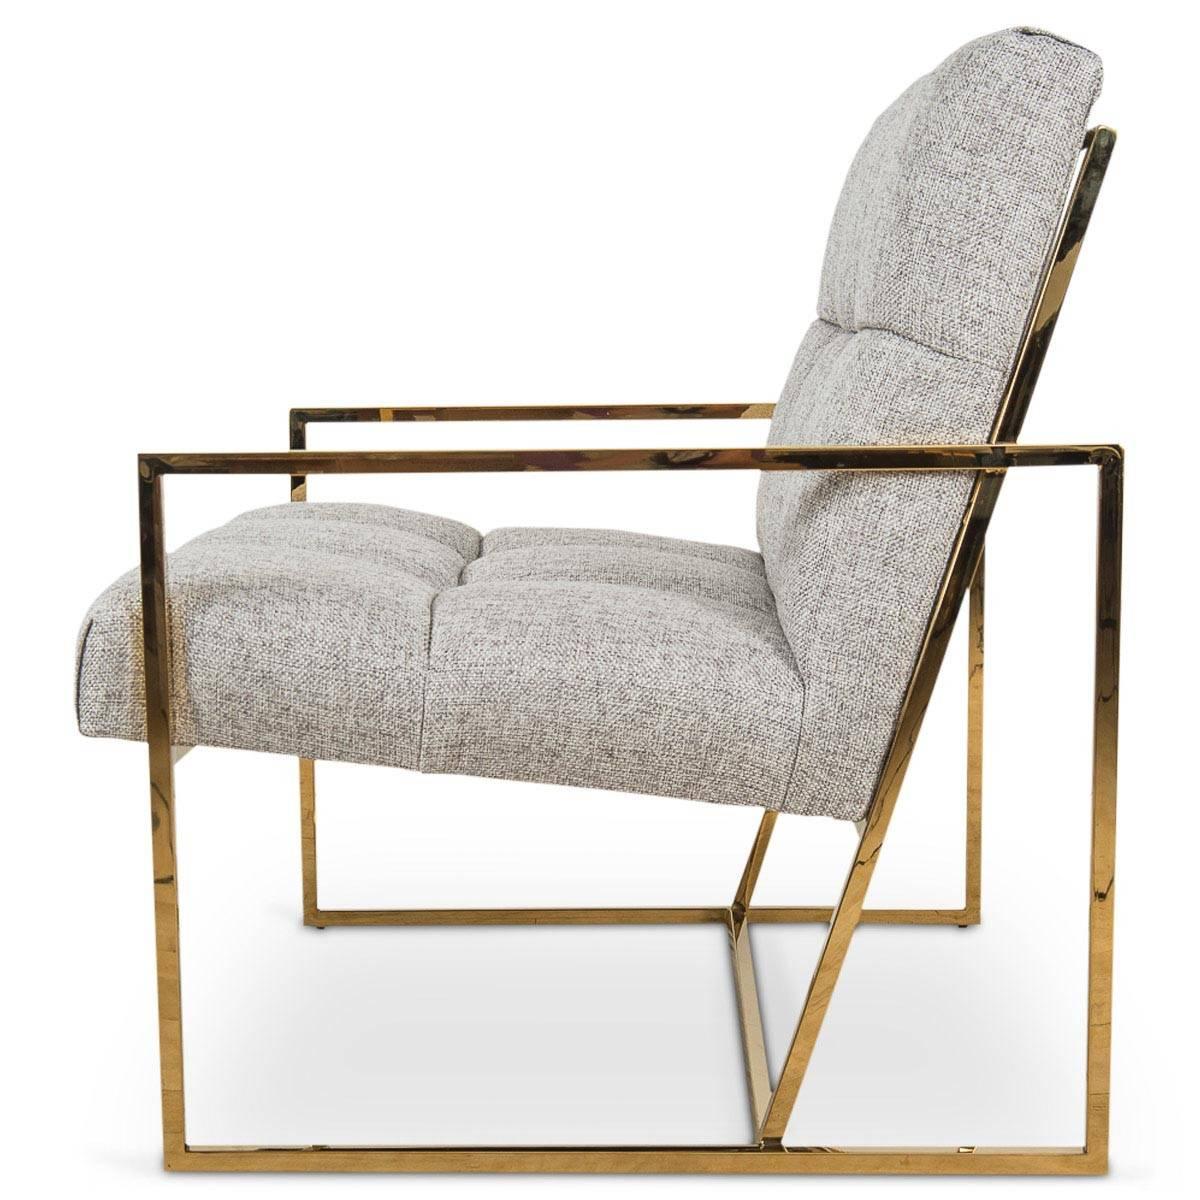 A slick brass frame, a slight pitched back and tufted linen is the santorini chair. Perfect on its own or pair it up. Shown in Peppercorn Linen.

Measures: 31